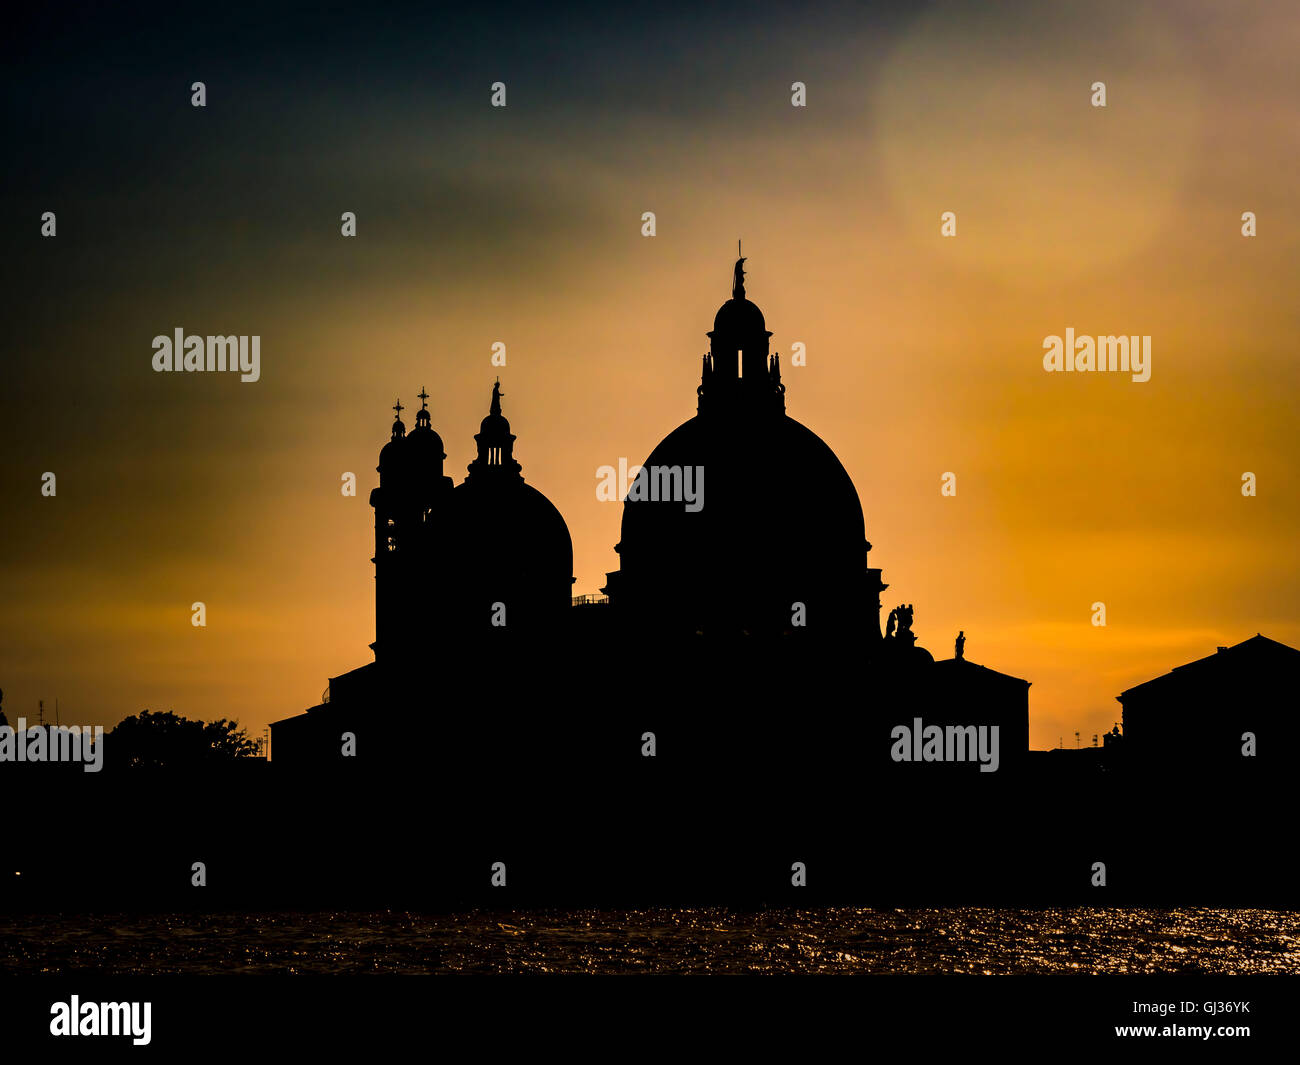 Silhouette of Santa Maria della Salute, Grand Canal, against a golden sky at sunset. Venice, Italy. Stock Photo